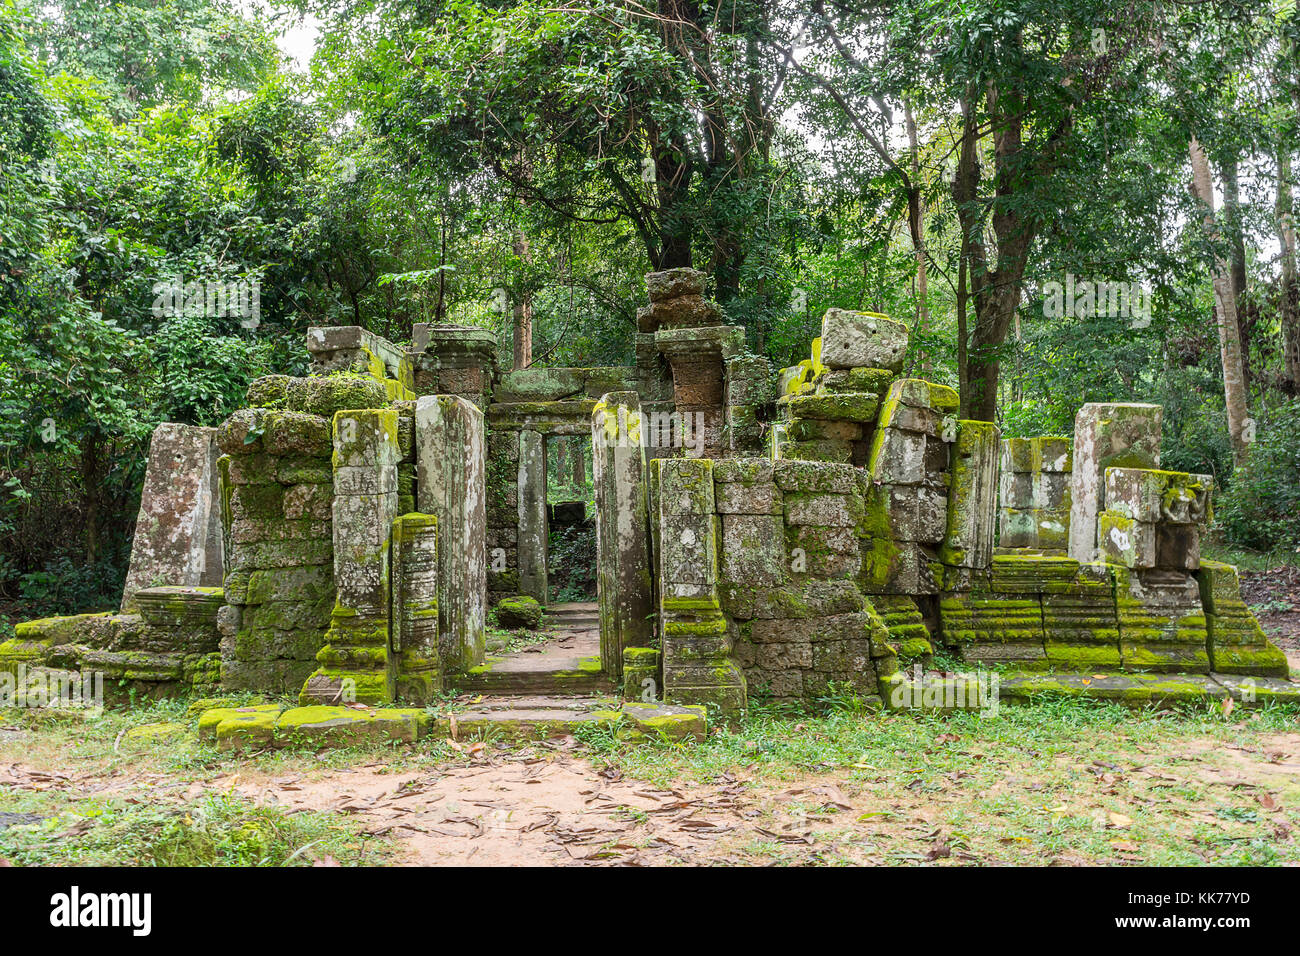 A view of a ruined temple at Banteay Kdei in the Angkor Wat complex outside of Siem Reap, Cambodia. Stock Photo